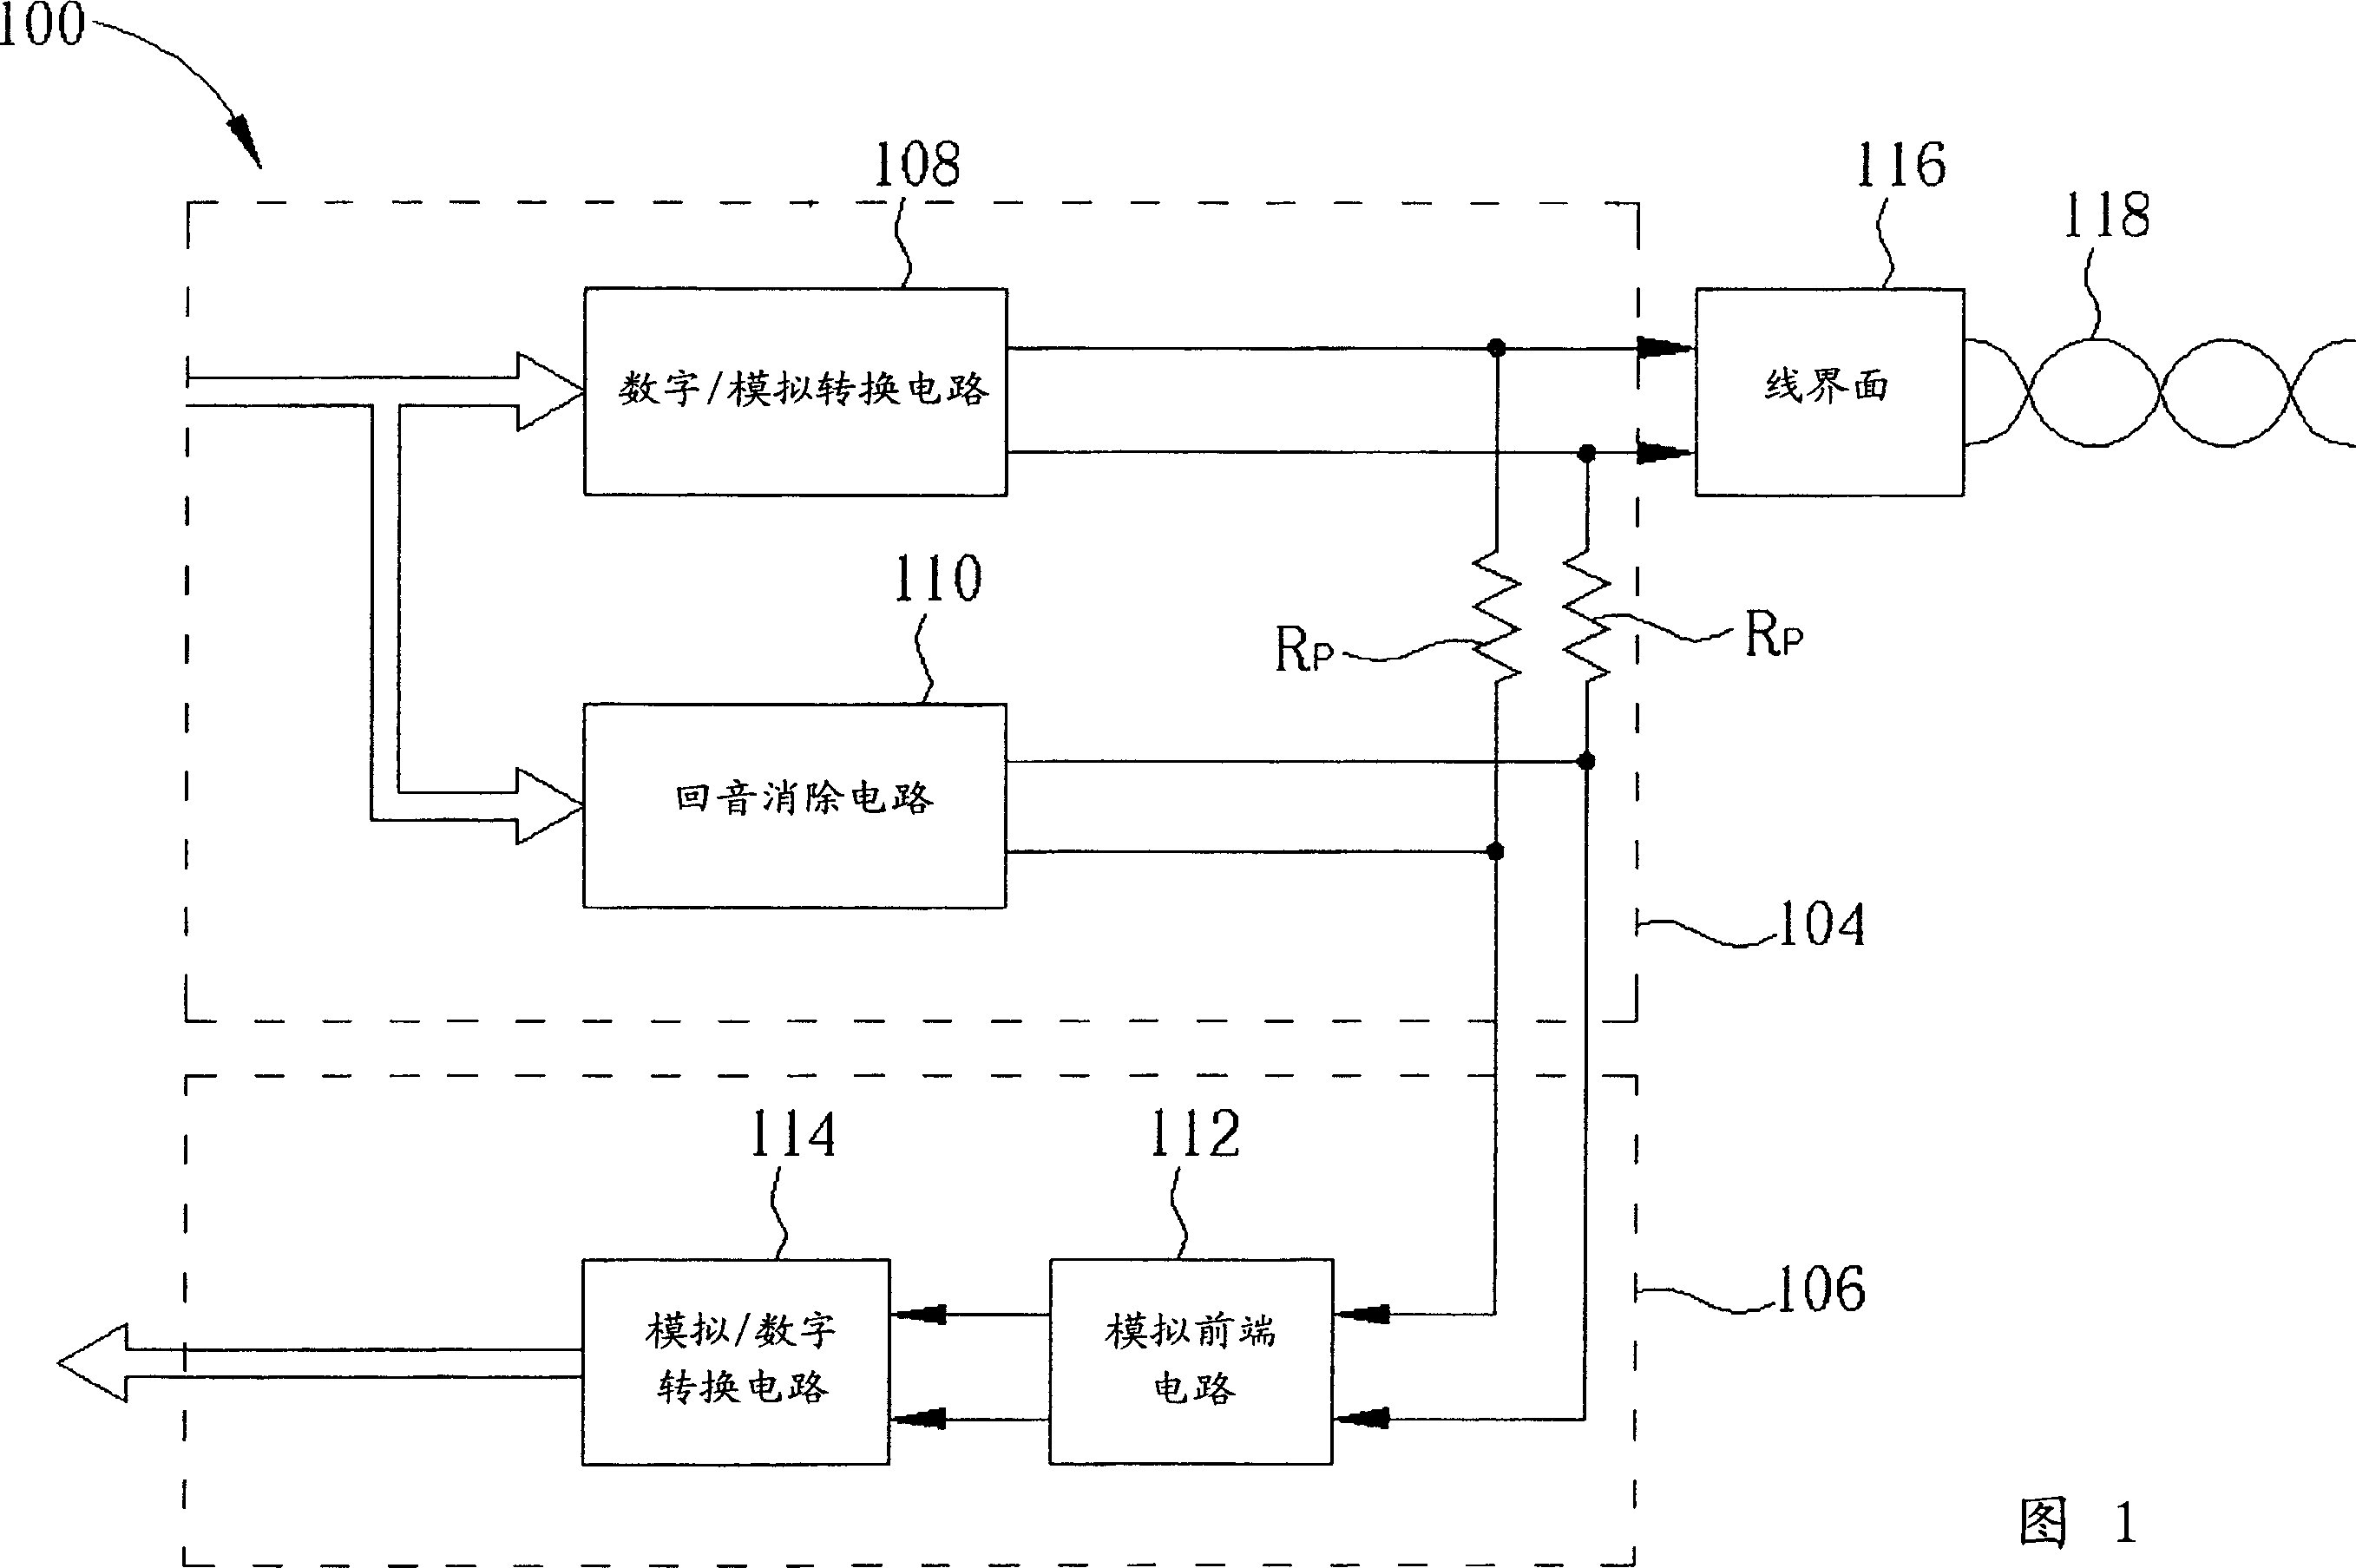 Adjustable echo eliminating apparatus for all duplex communication systems